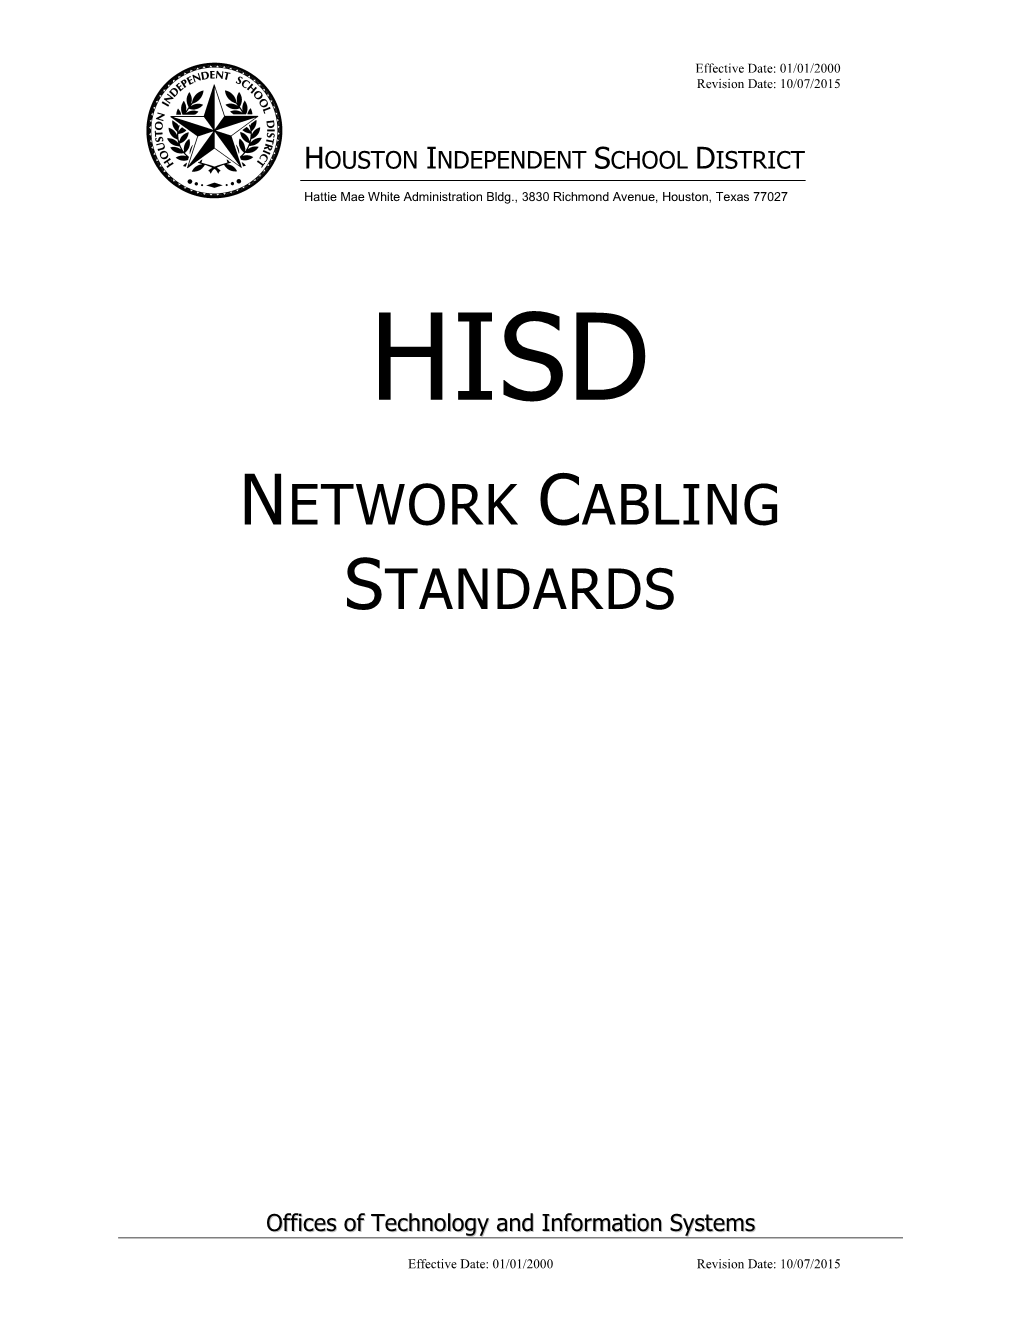 Hisd Network Cabling Standards